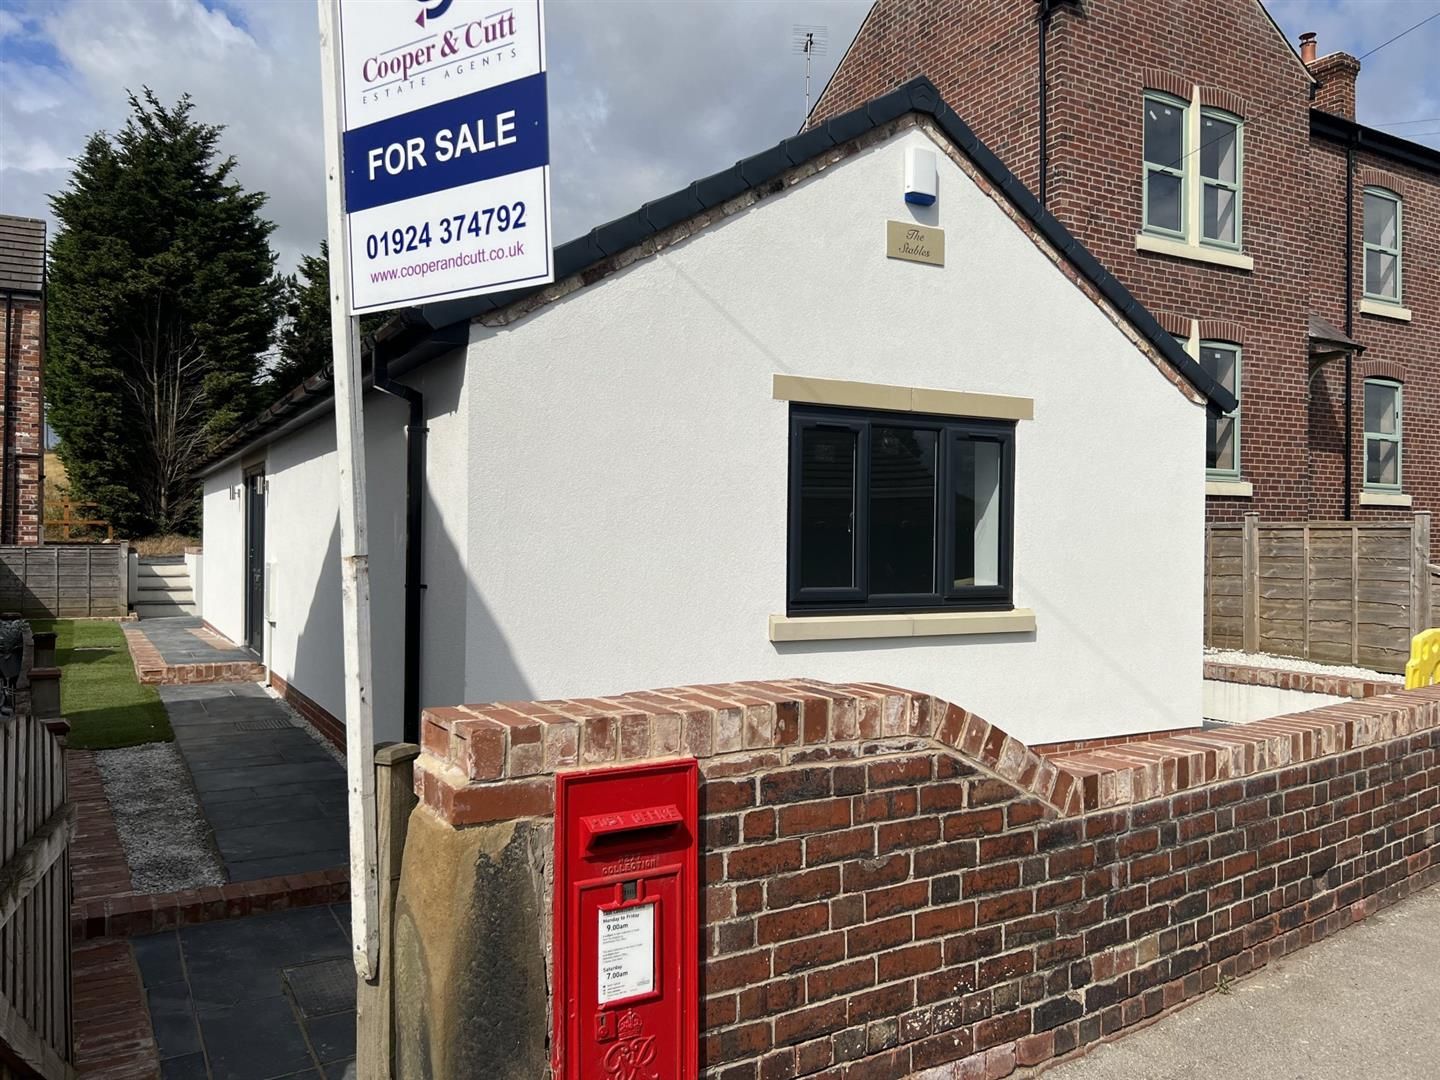 New Road, New Road, Old Snydale, Pontefract, WF7 6HB